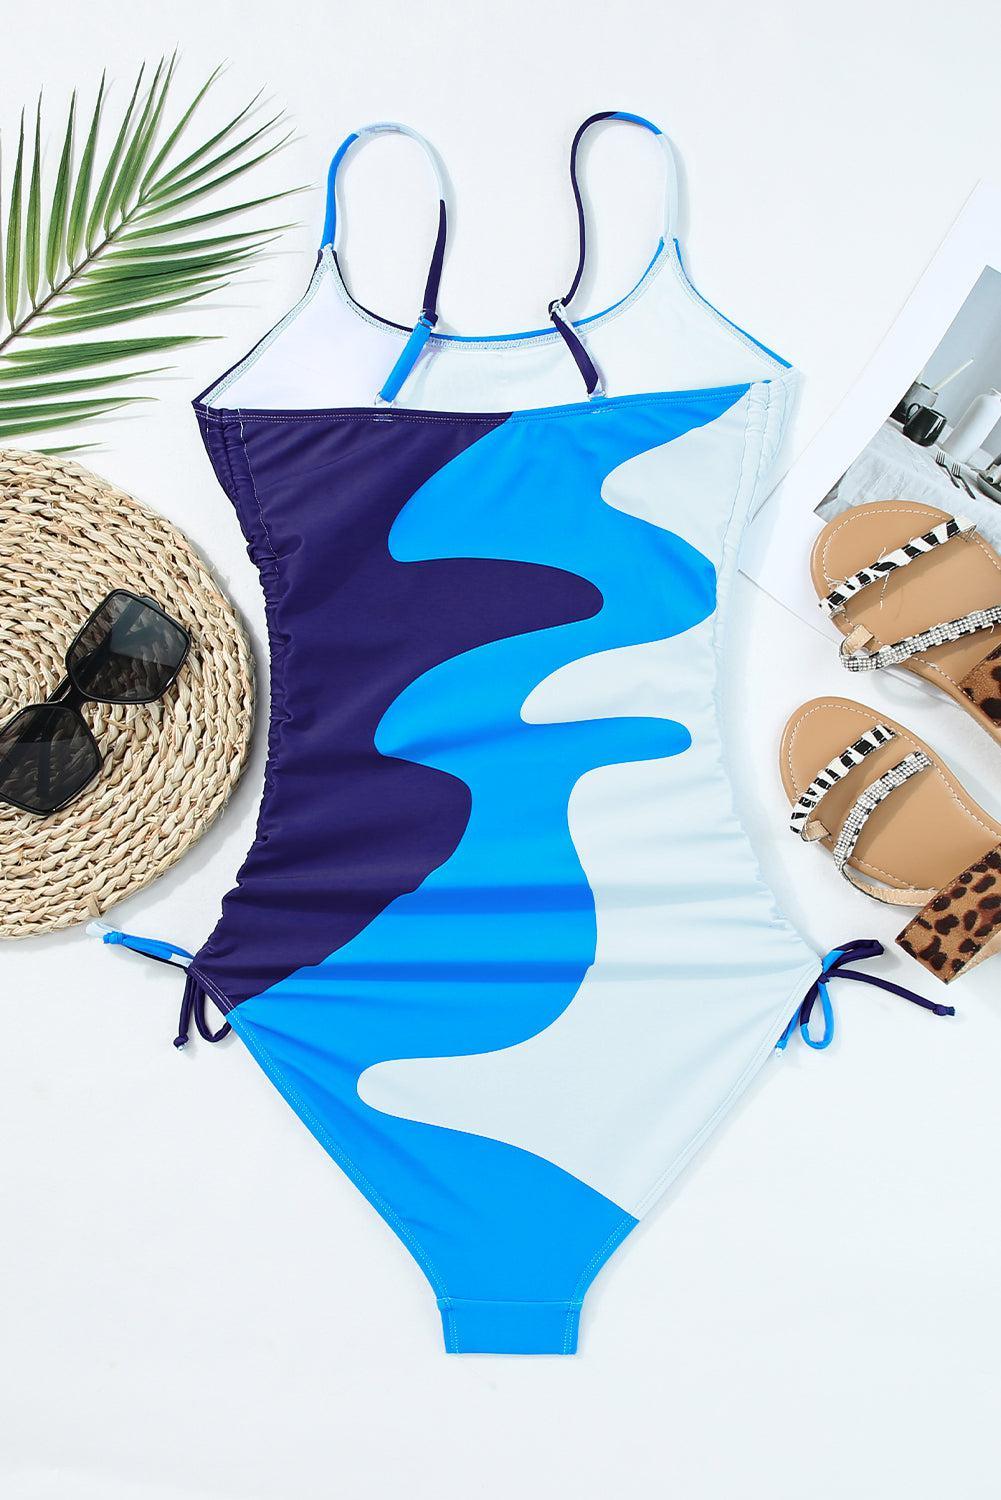 a blue and white one piece swimsuit next to a straw hat